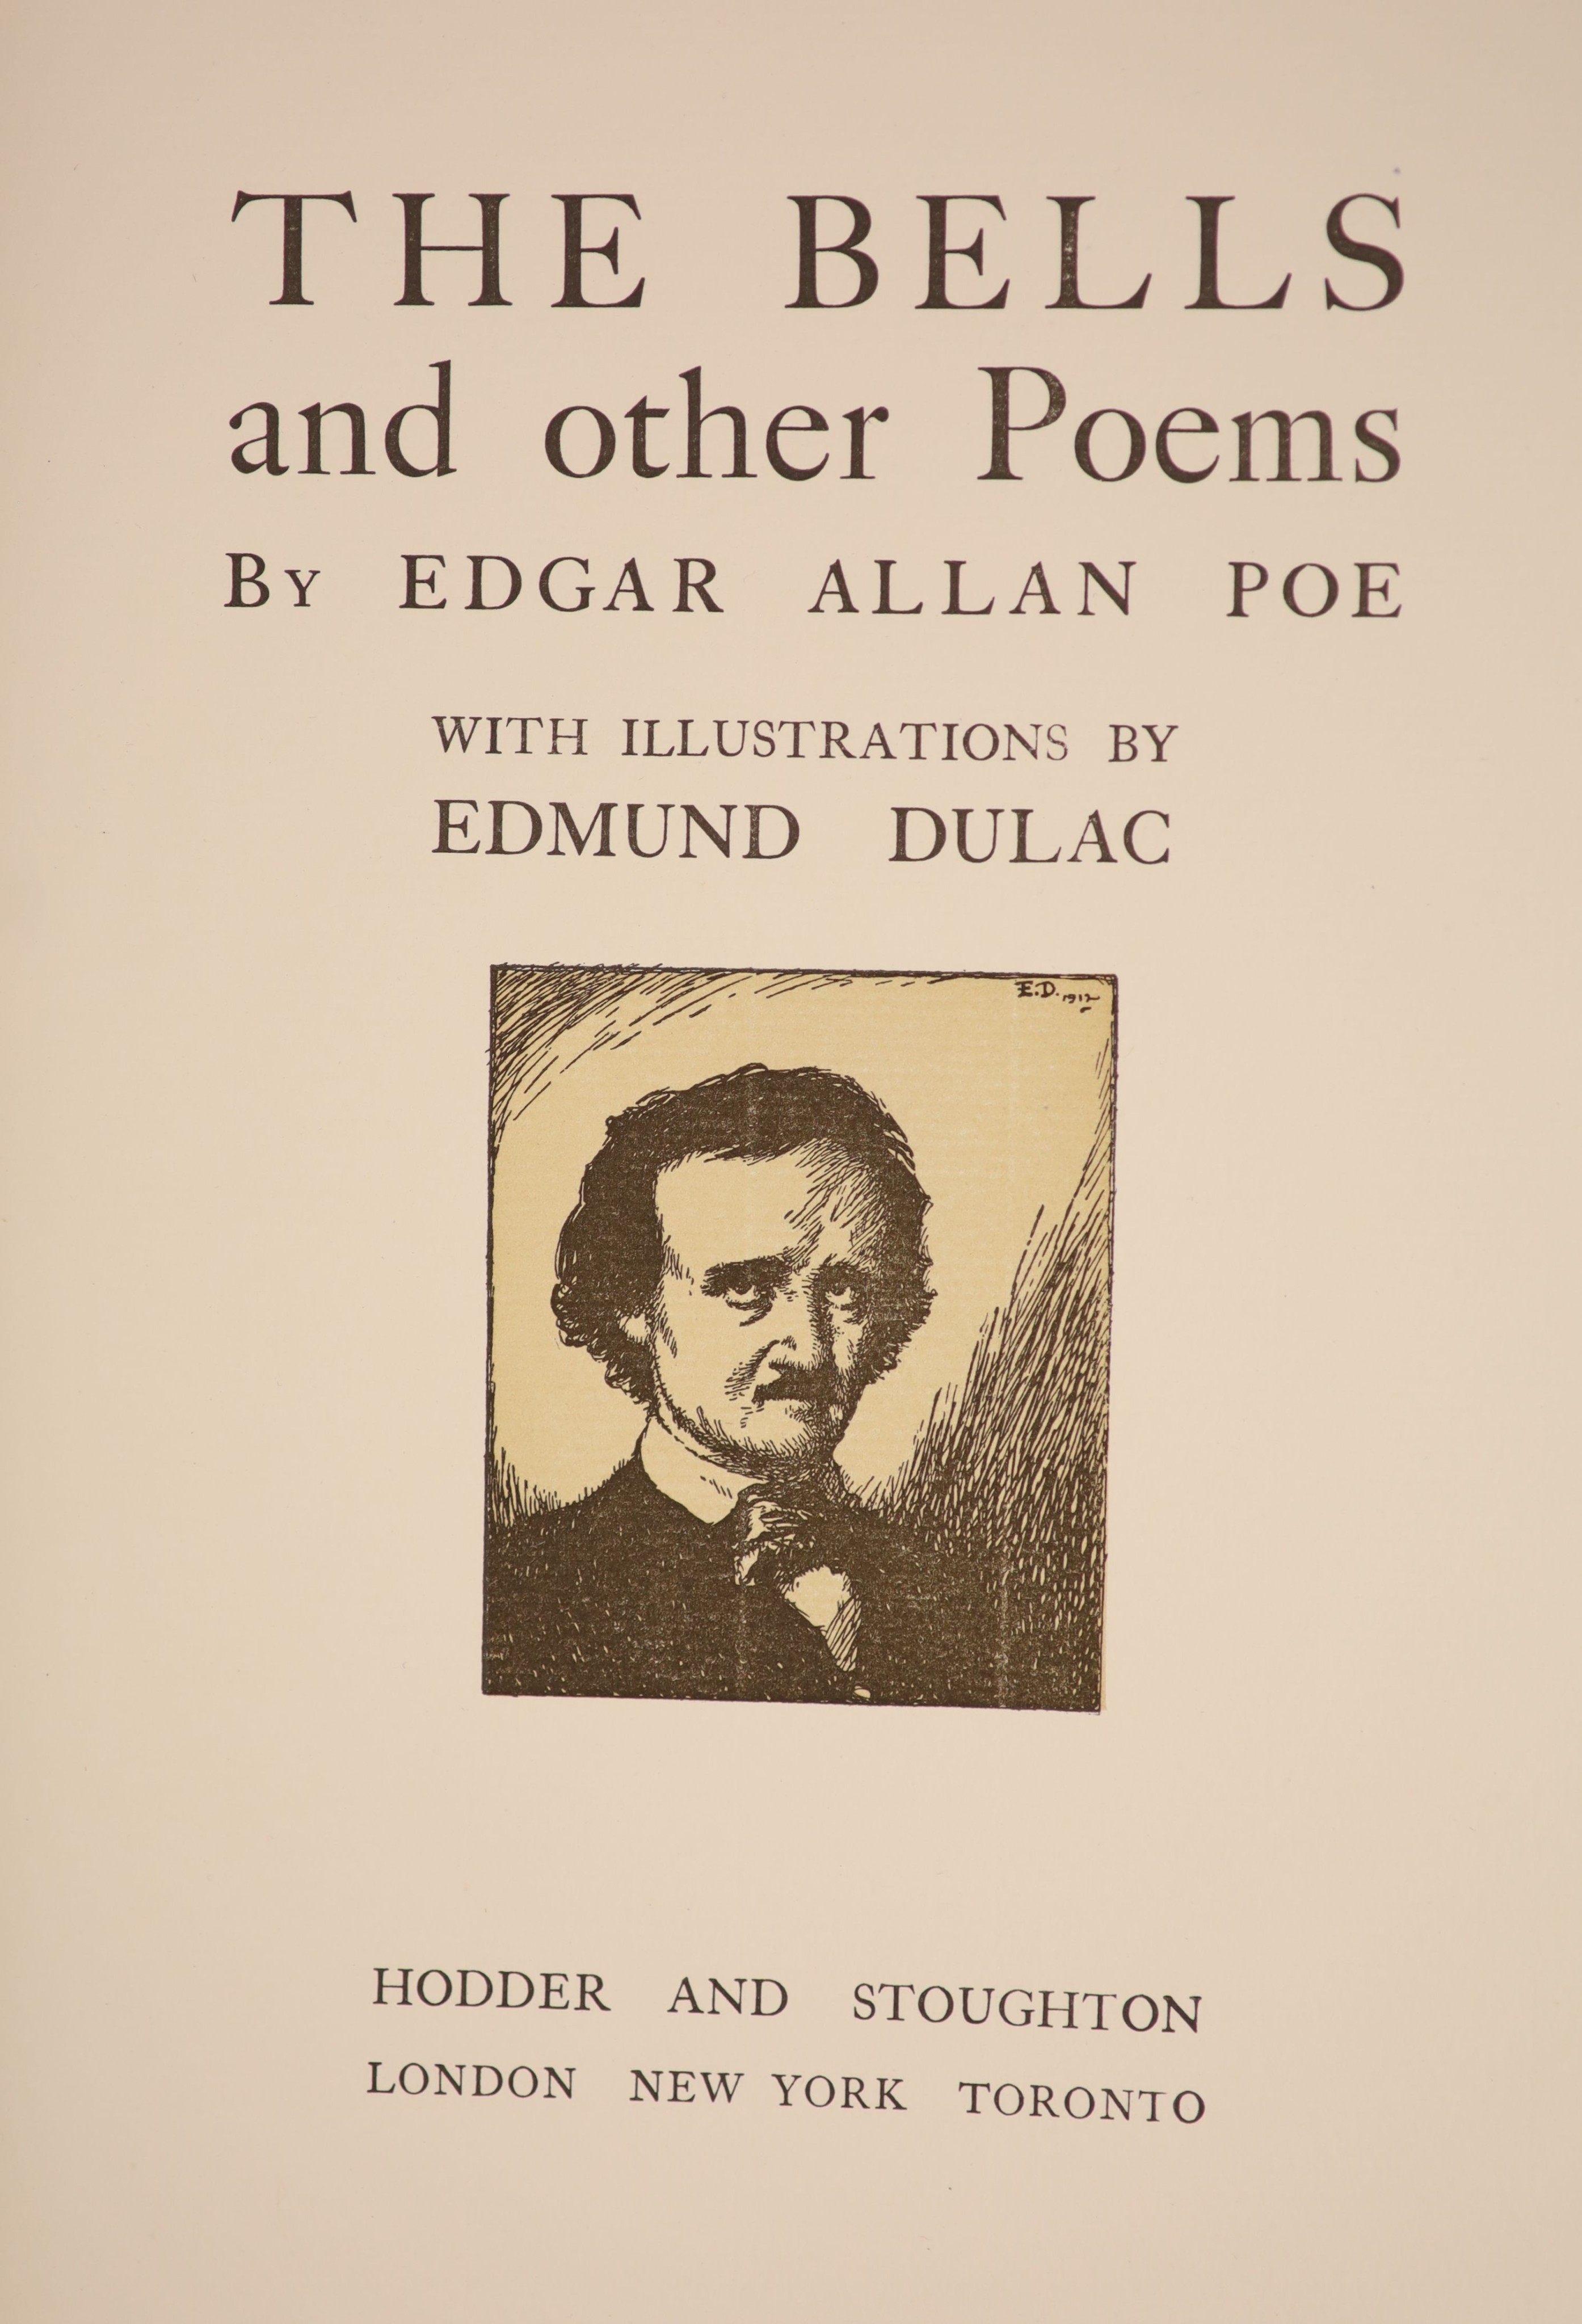 Poe, Edgar Allan - The Bells and other Poems. Complete with coloured title page vignette and 28 coloured plates by Edmund Dulac, each with a descriptive tissue guard and numerous text illustrations. Original publishers’